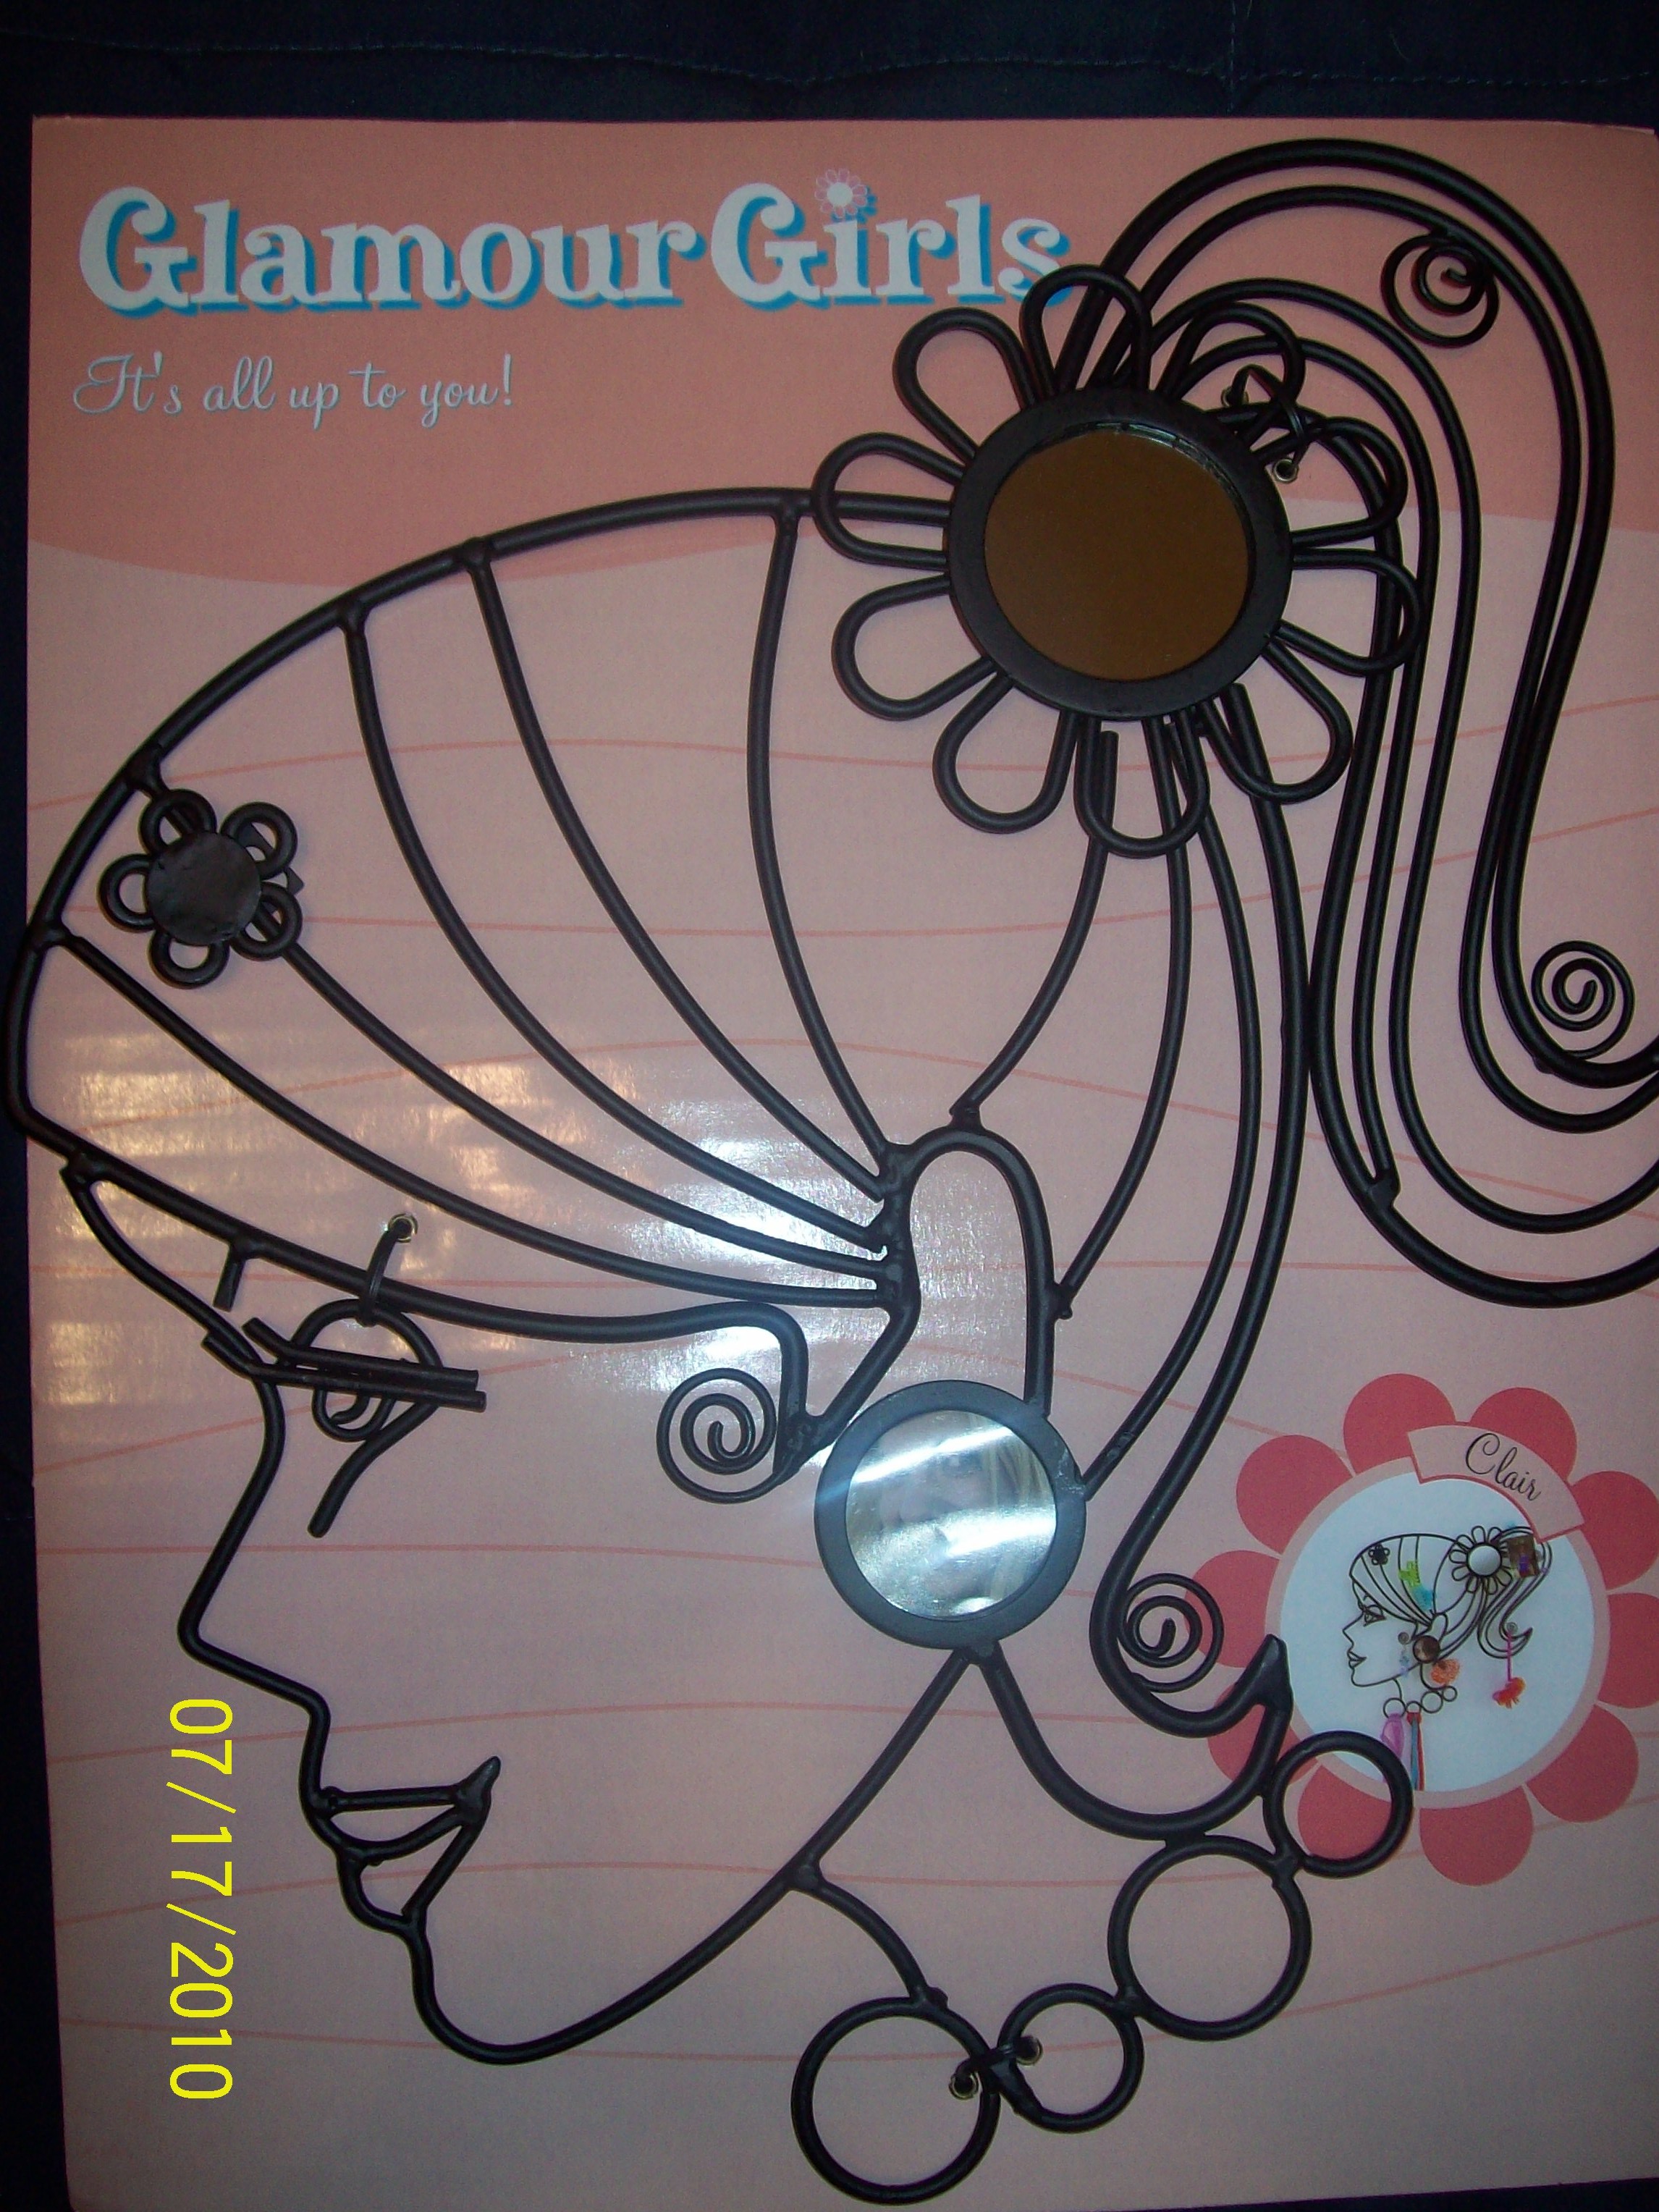 Glamour Girl Metal Wall Art Pony (New in box)